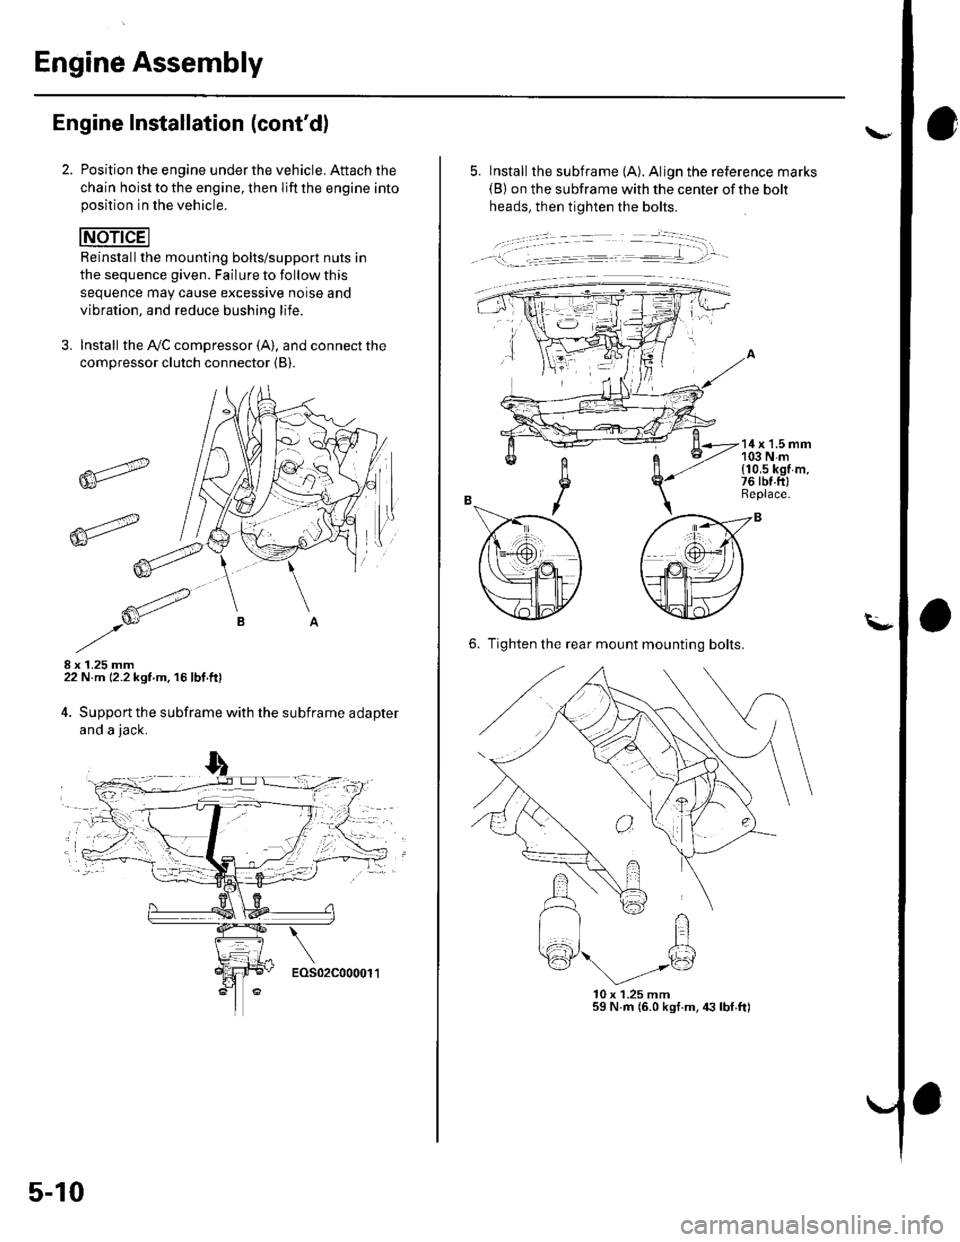 HONDA CIVIC 2003 7.G User Guide Engine Assembly
Engine Installation (contd)
Position lhe engine under the vehicle. Attach the
chain hoist to the engine, then lift the engine intoposition in the vehicle.
Reinstallthe mounting bolts/